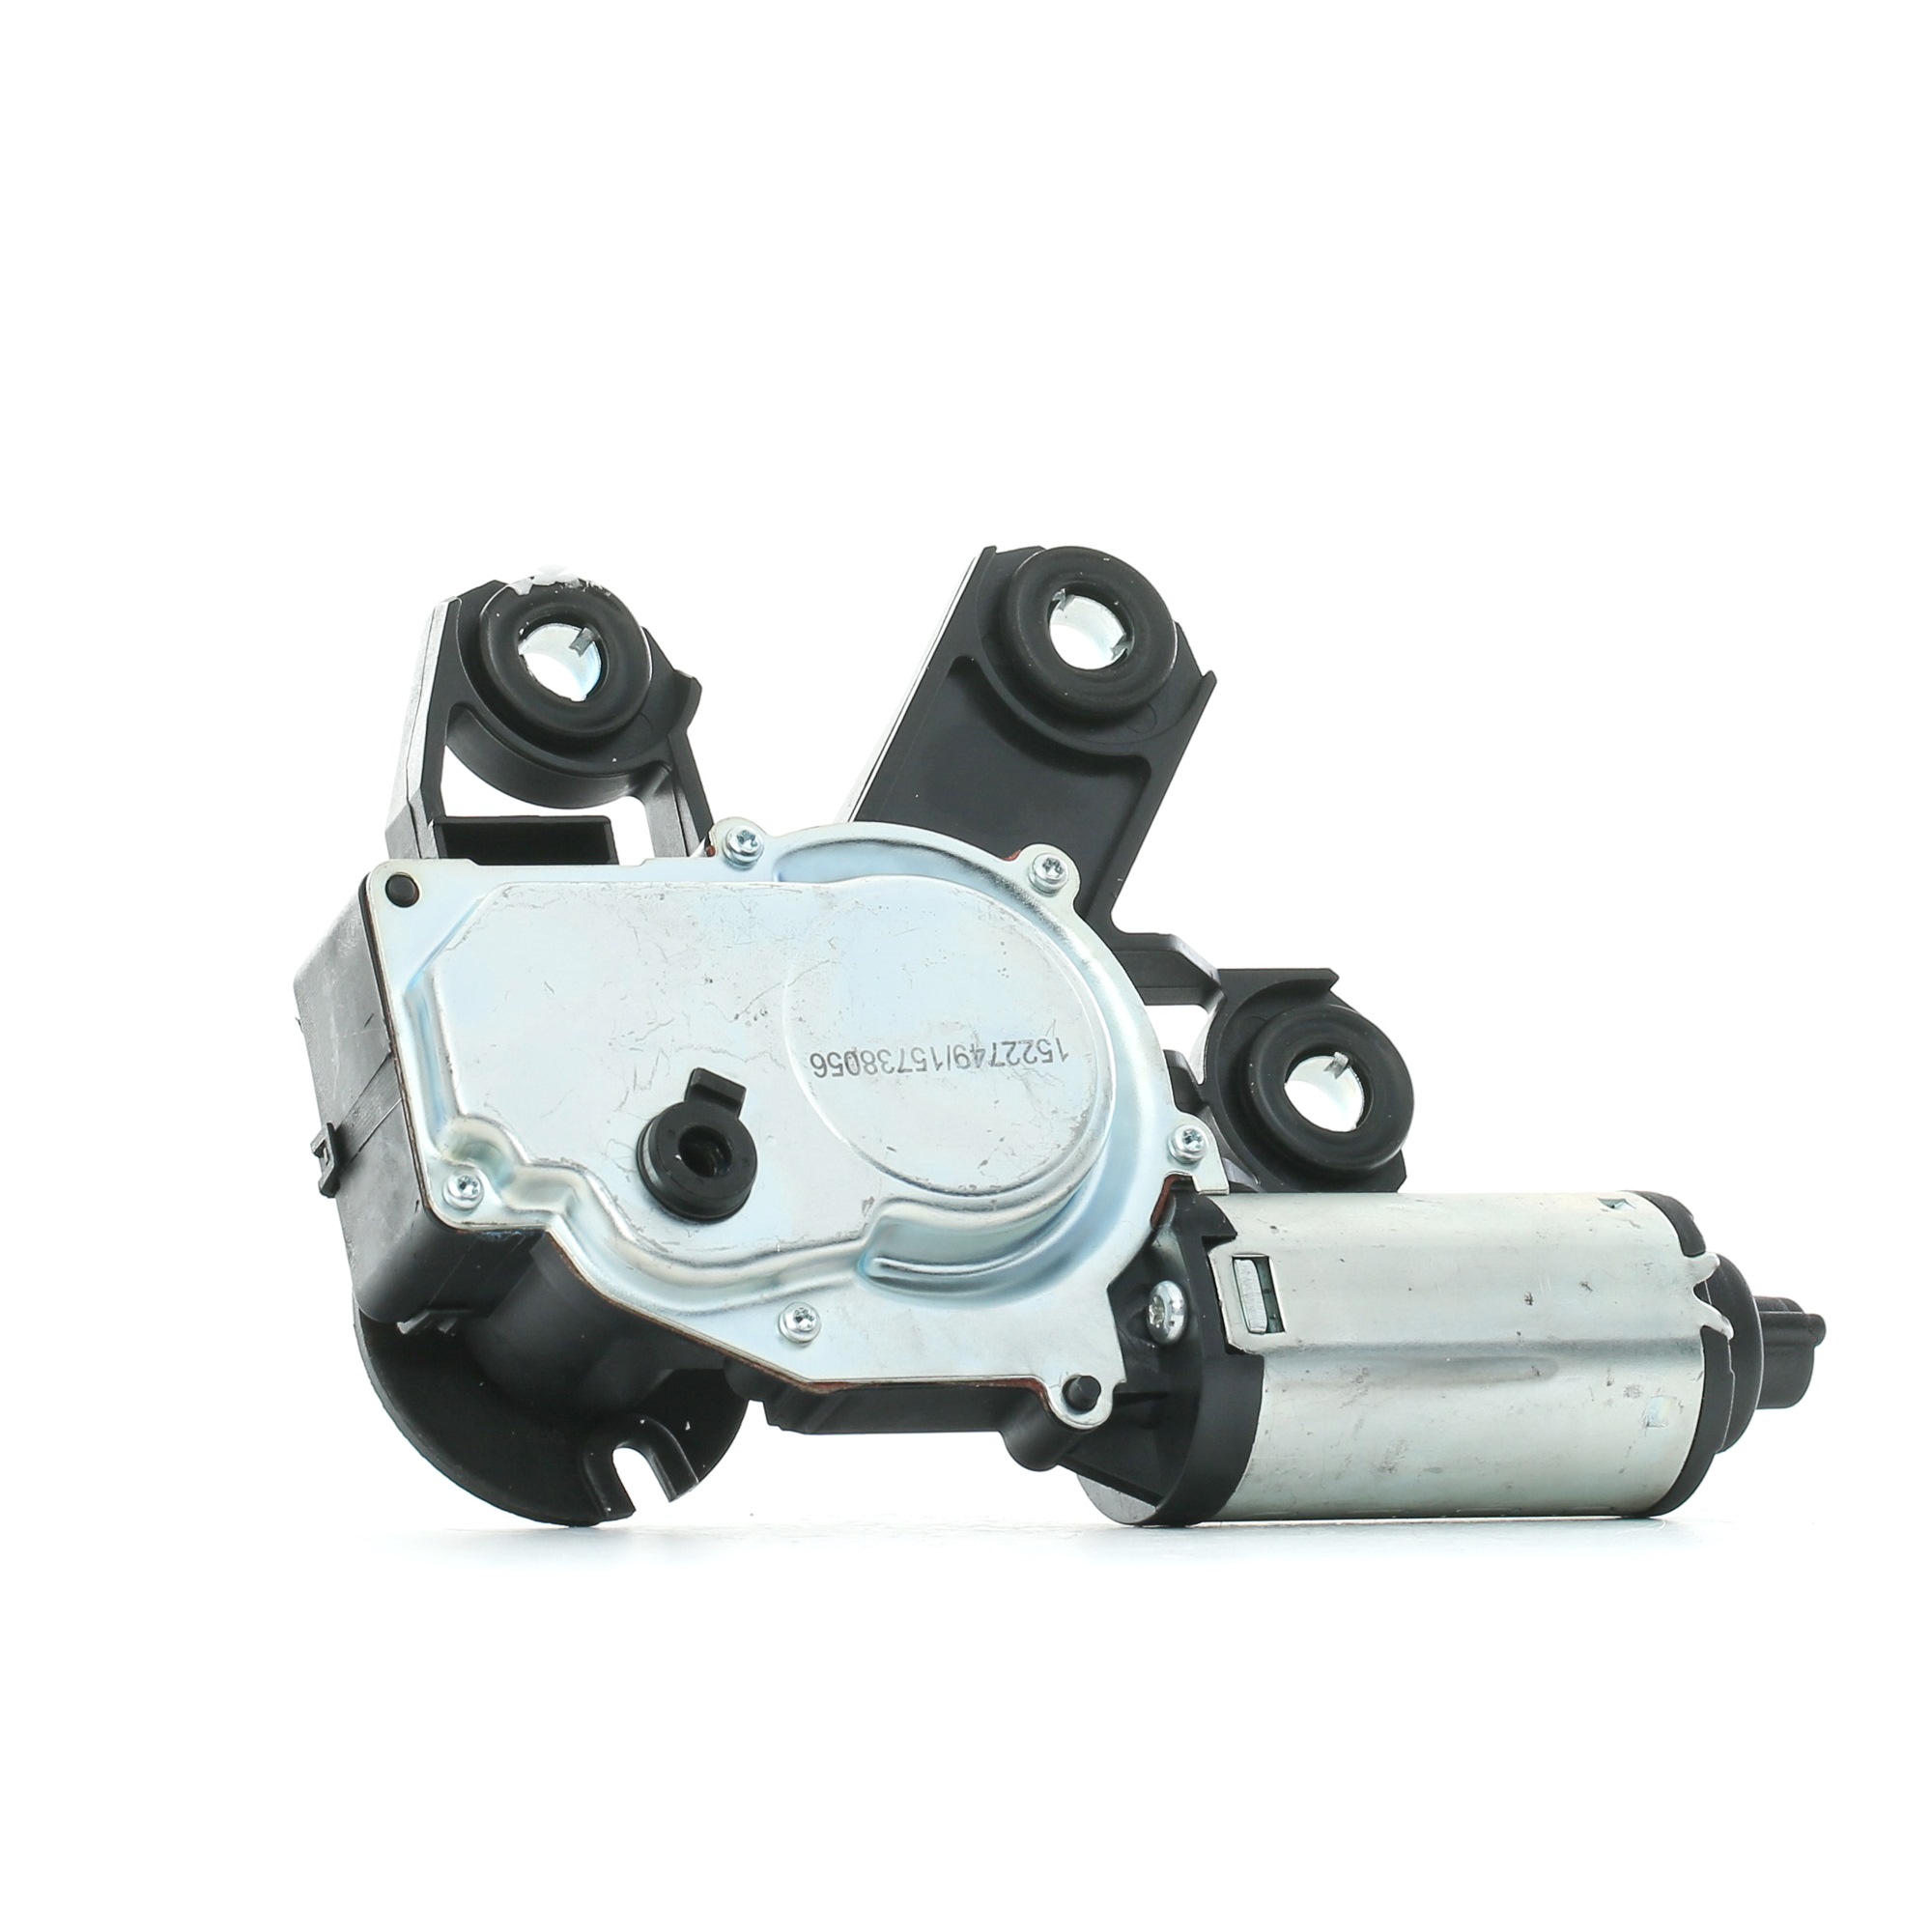 RIDEX 295W0131 Wiper motor 12V, Rear, for left-hand/right-hand drive vehicles